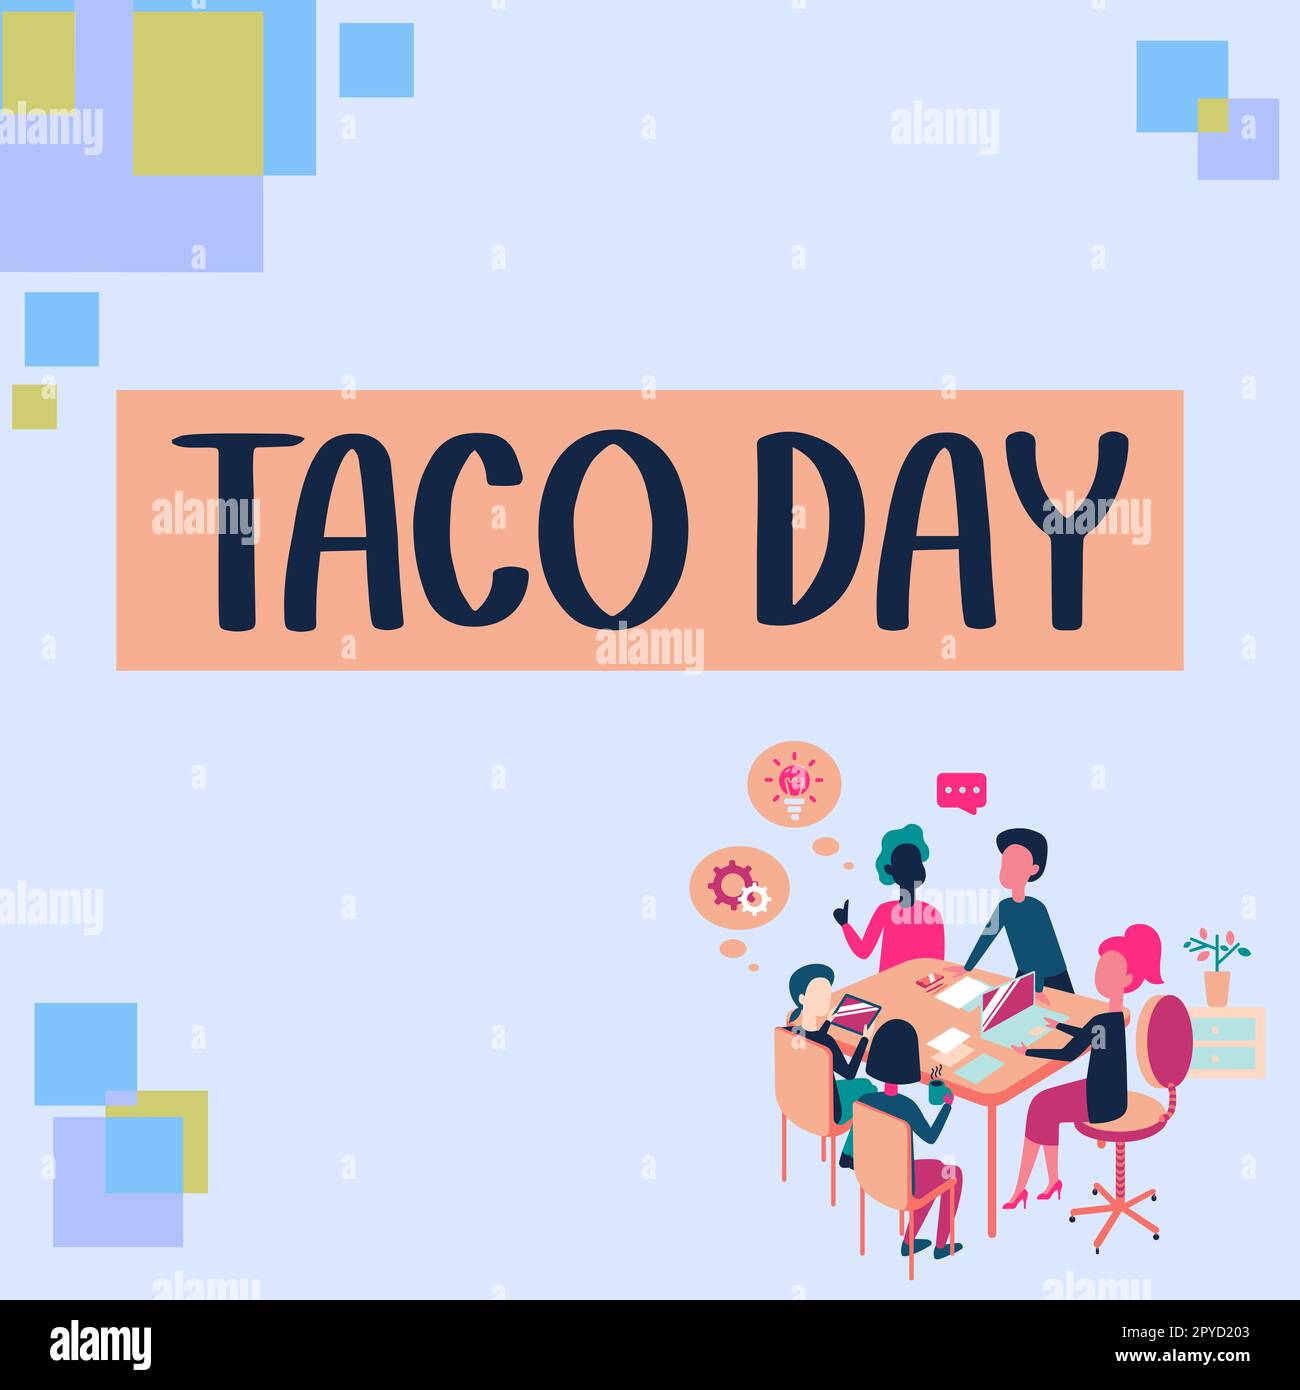 Writing displaying text Taco Day. Business concept celebratory day that promotes to consumption of tacos in the US Stock Photo